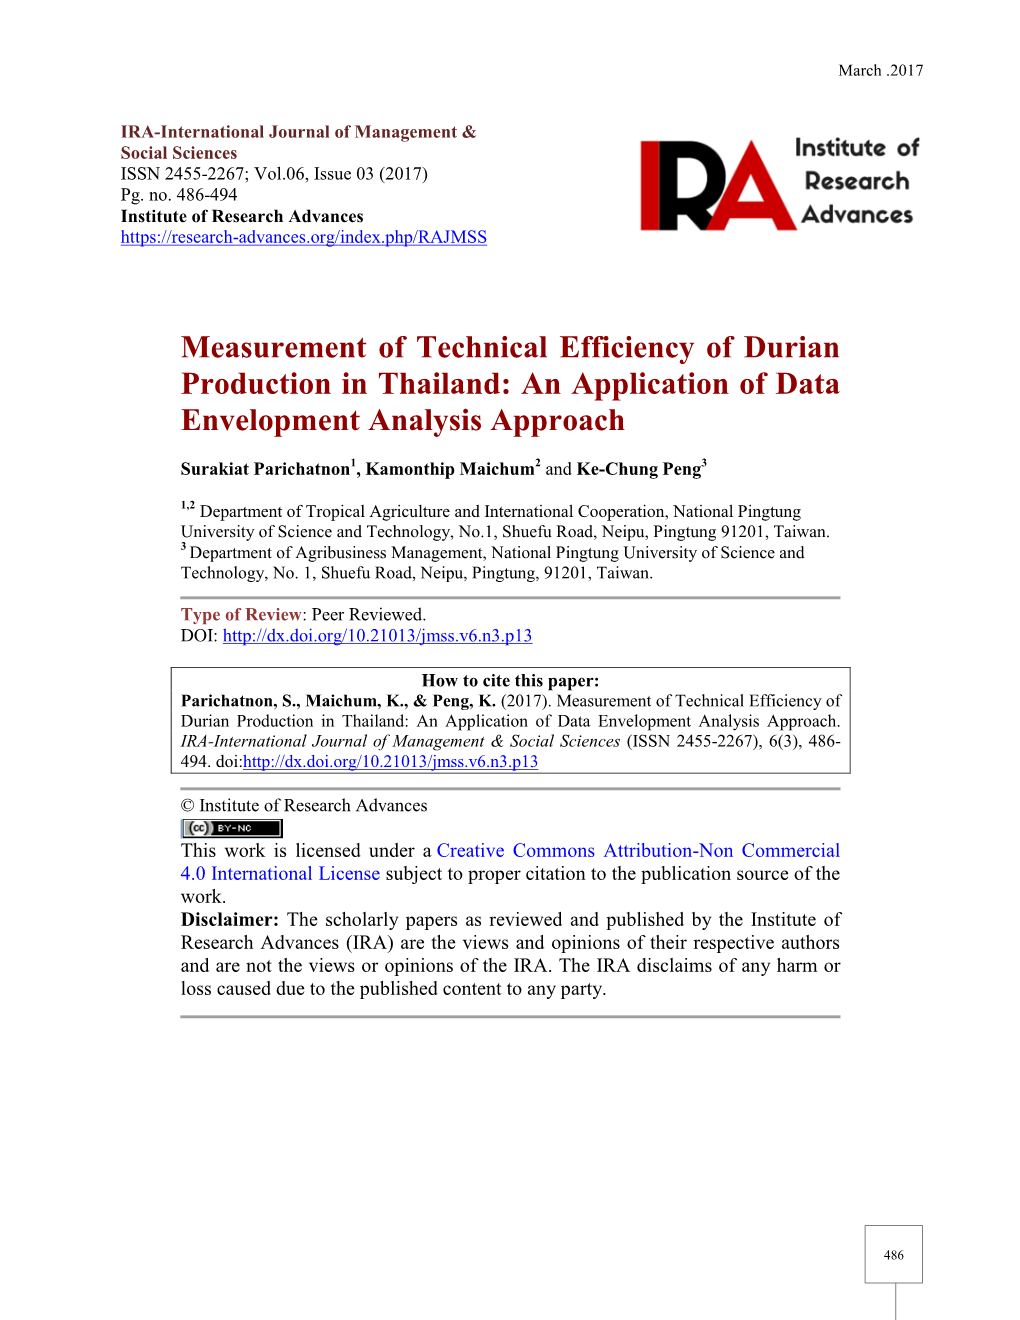 Measurement of Technical Efficiency of Durian Production in Thailand: an Application of Data Envelopment Analysis Approach